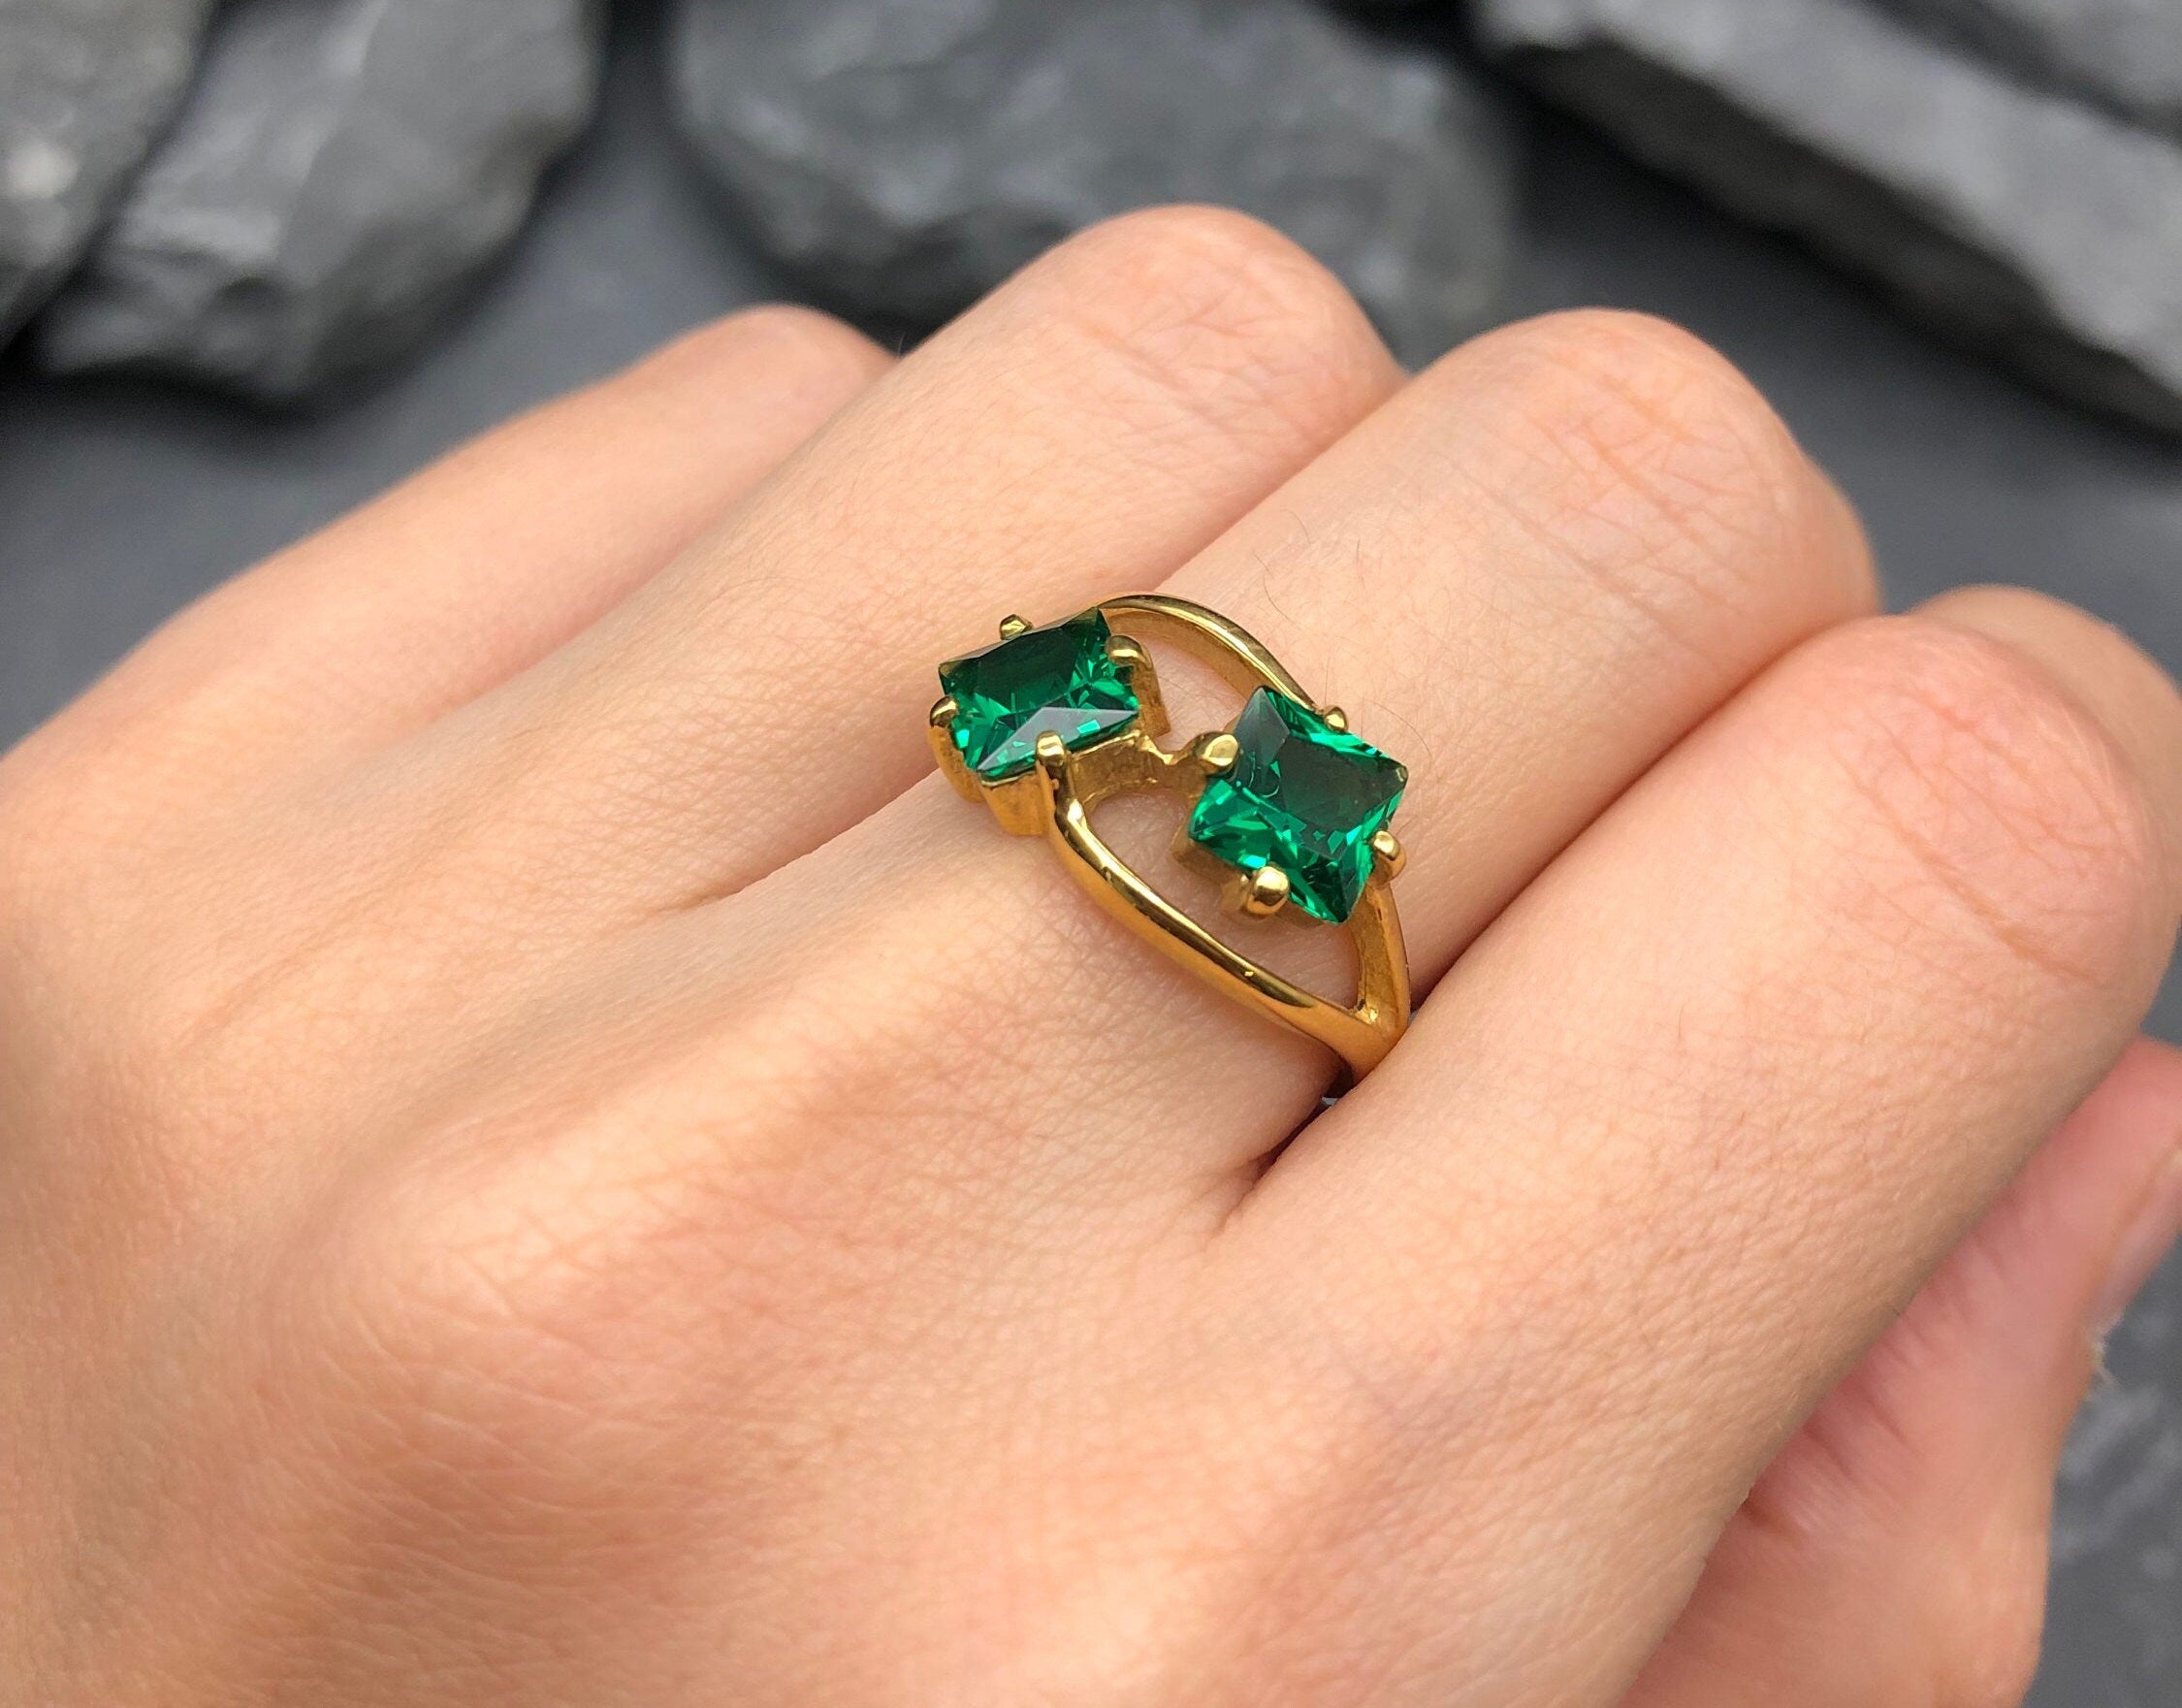 Gold Emerald Ring, Created Emerald, Two Stone Ring, Square Ring, Asymmetric Ring, Forever Us Ring, Statement Ring, Unique Ring, Gold Vermeil